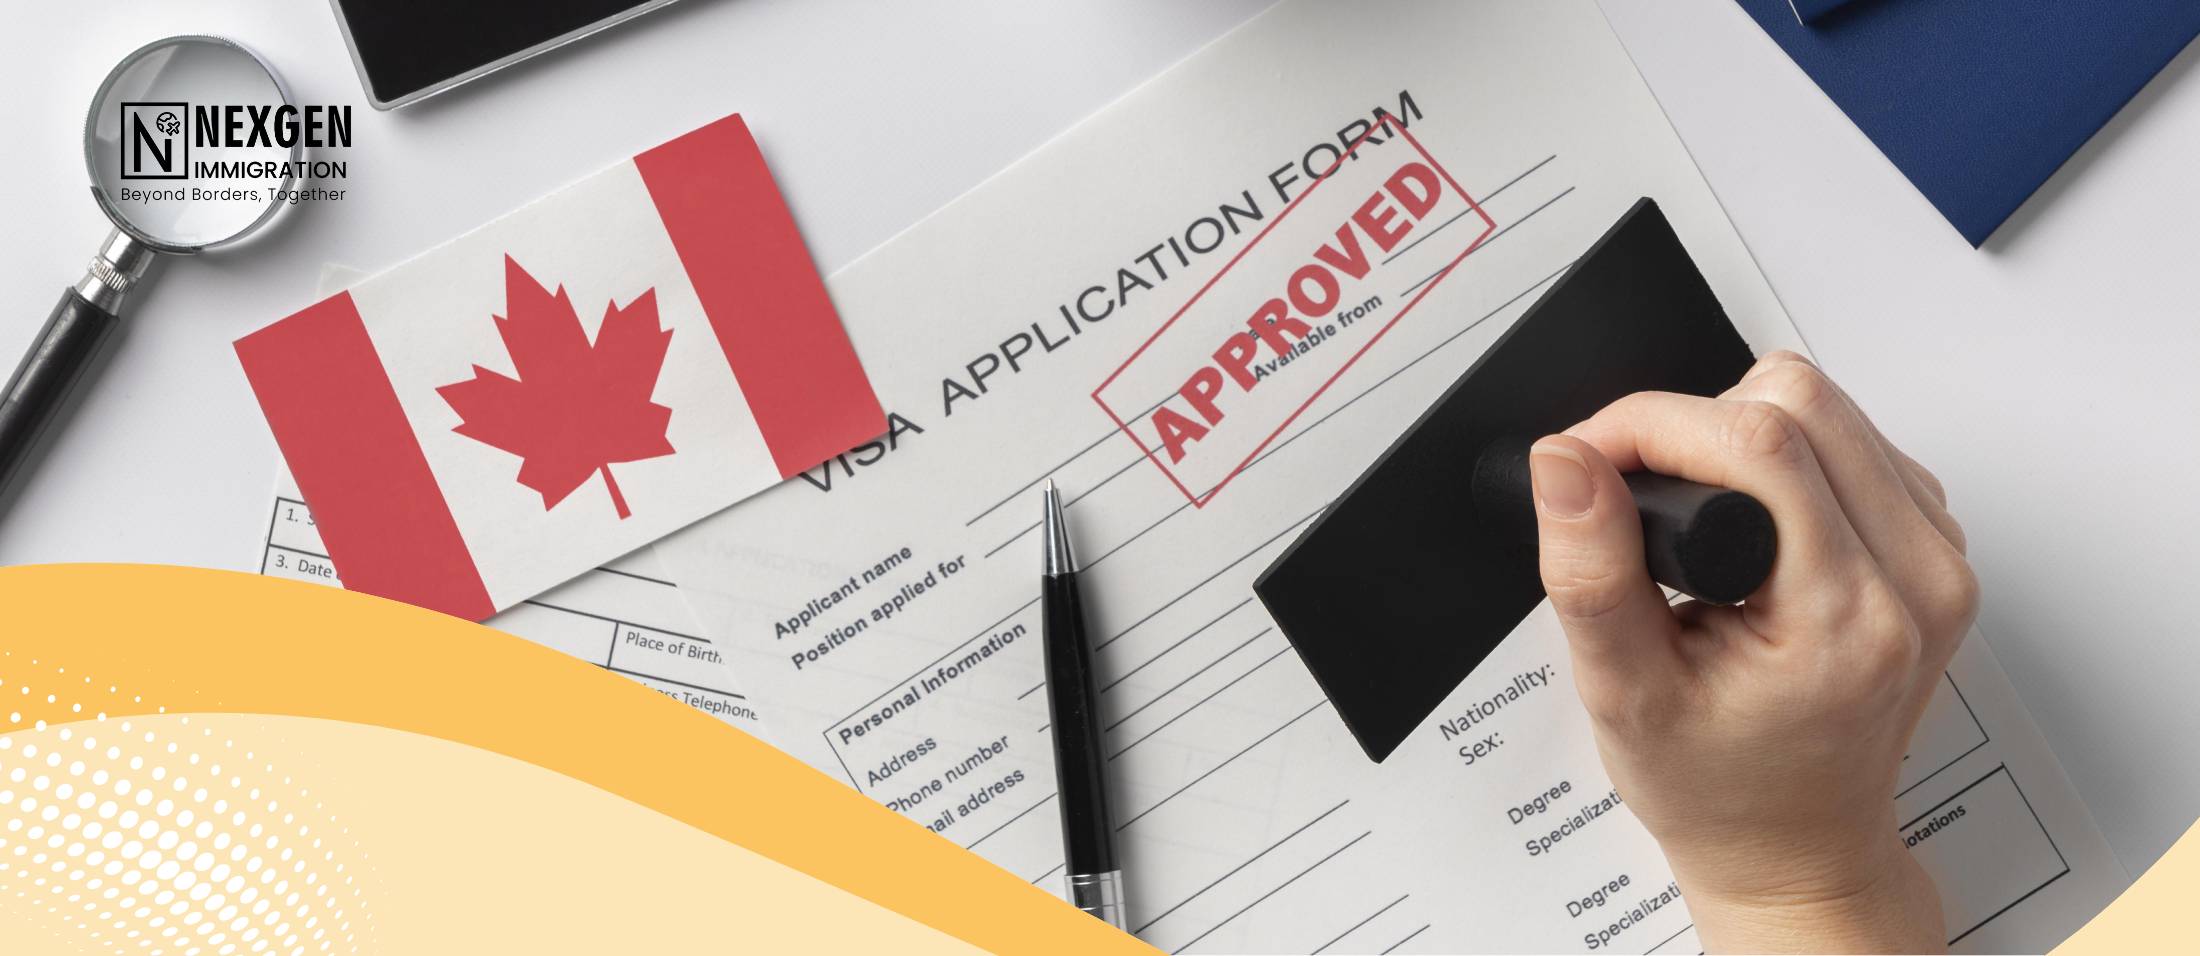 How To Get A Work Visa For Canada